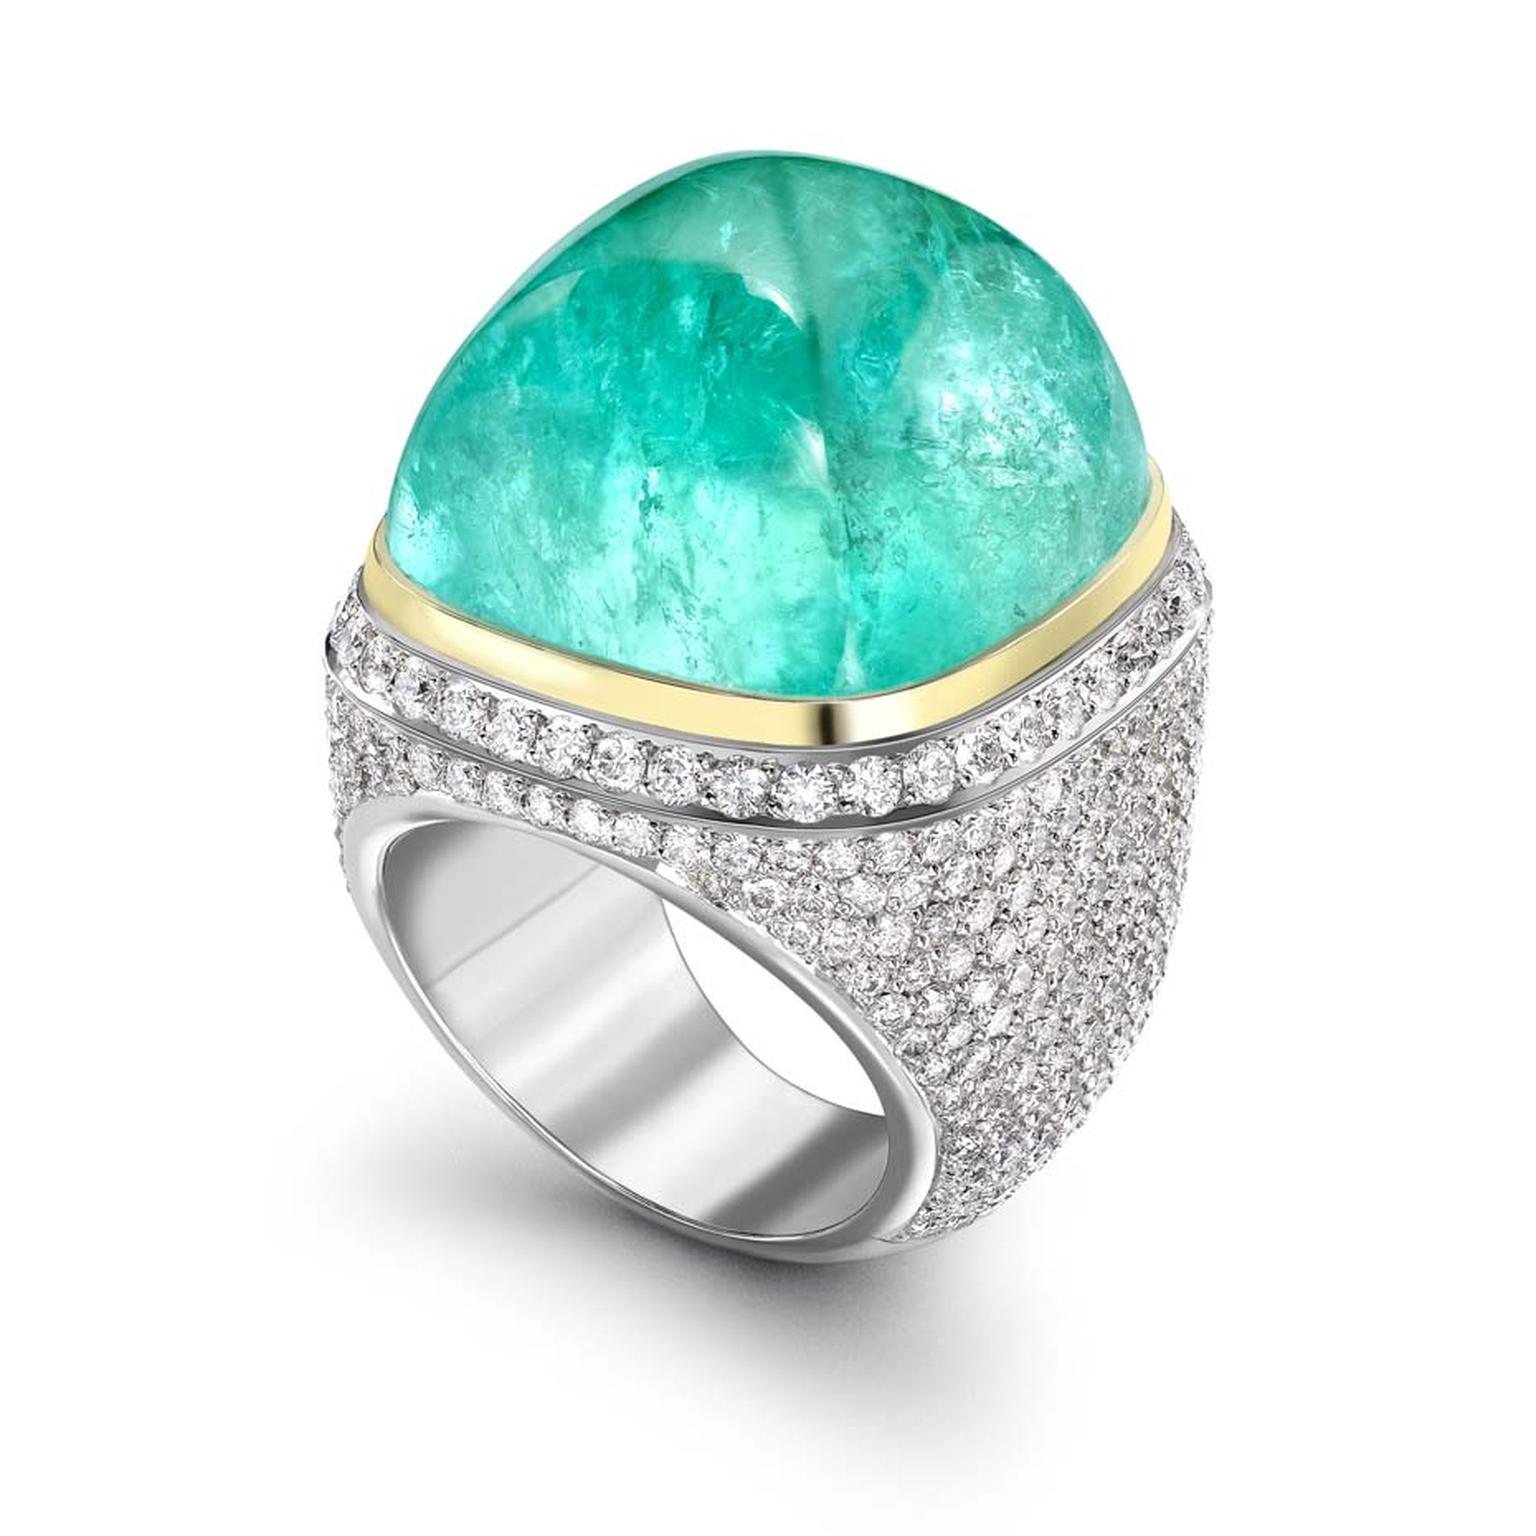 Theo Fennell has created this spectacular 61.94ct African Paraiba-like tourmaline Mozambique Ring. He describes the mesmerising coloured gemstone as "Hollywood swimming pool blue".